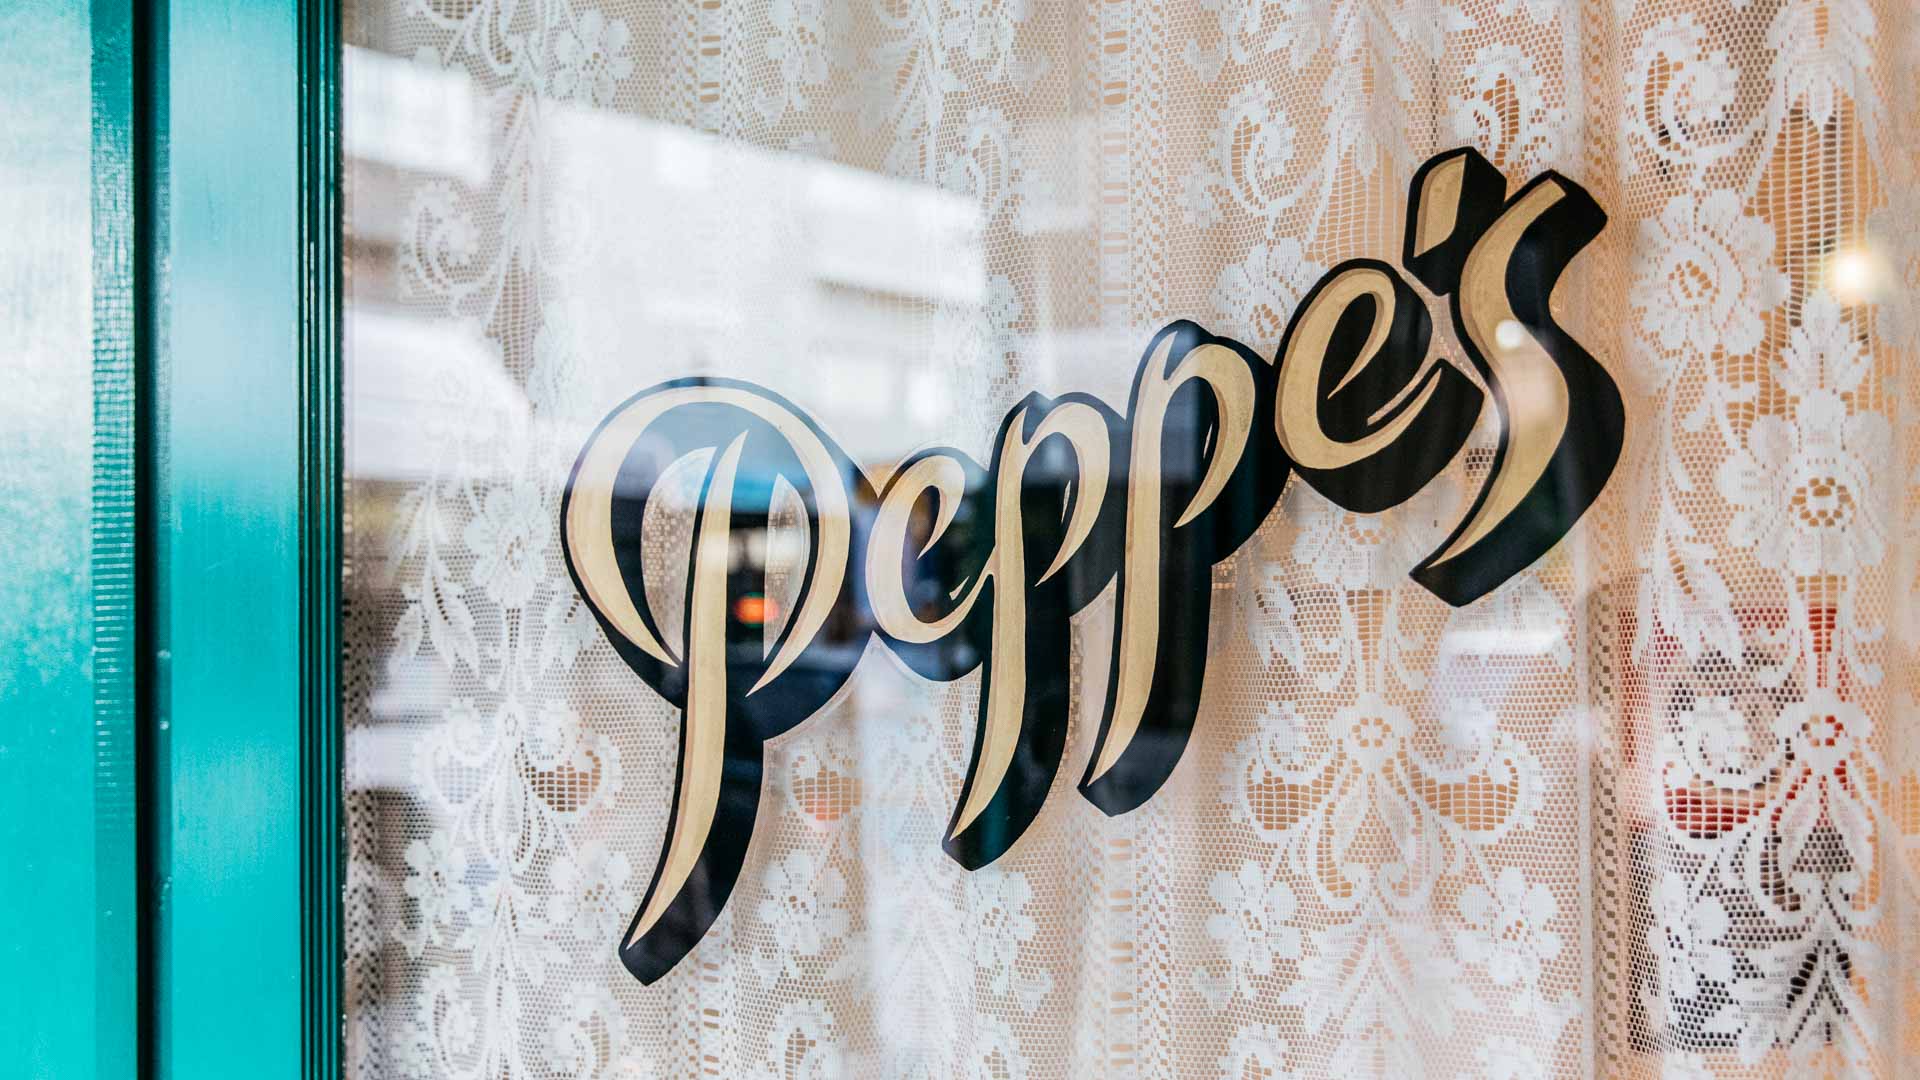 Peppe's - CLOSED